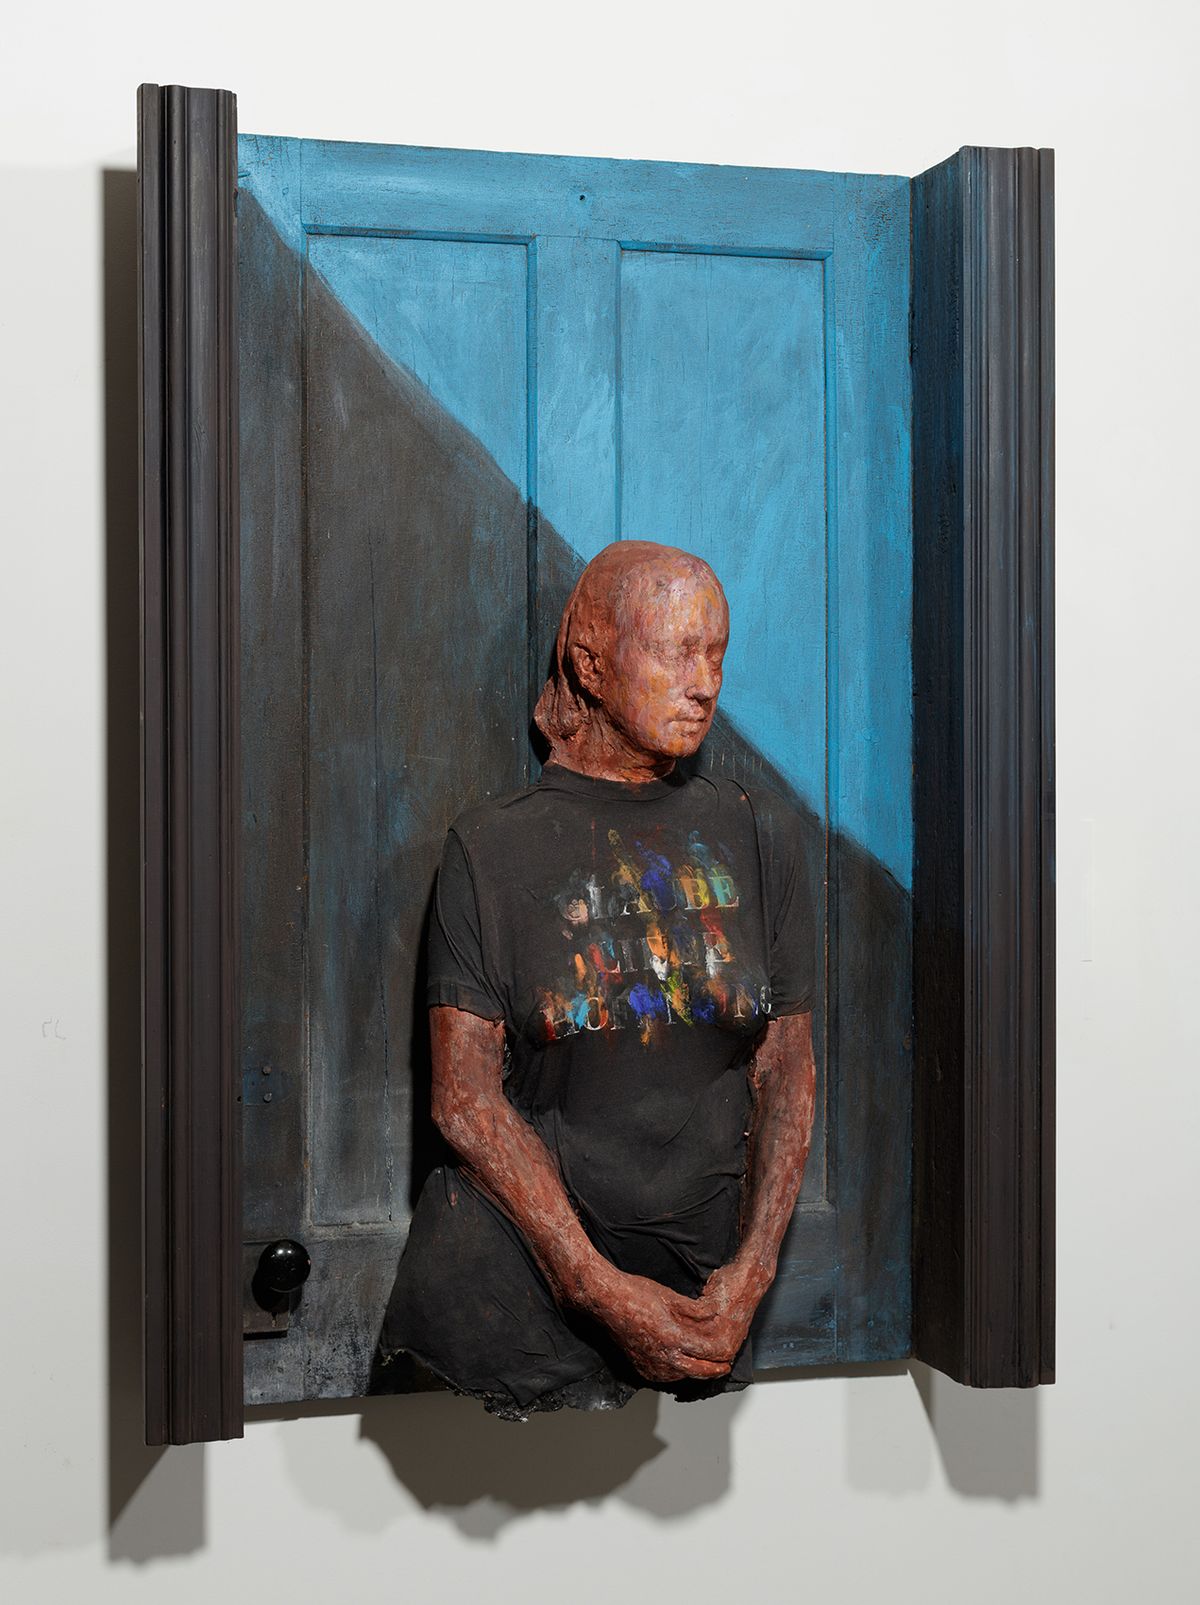 George Segal, Woman in Black T-Shirt (1990) Photo: courtesy of the Boca Raton Museum of Art